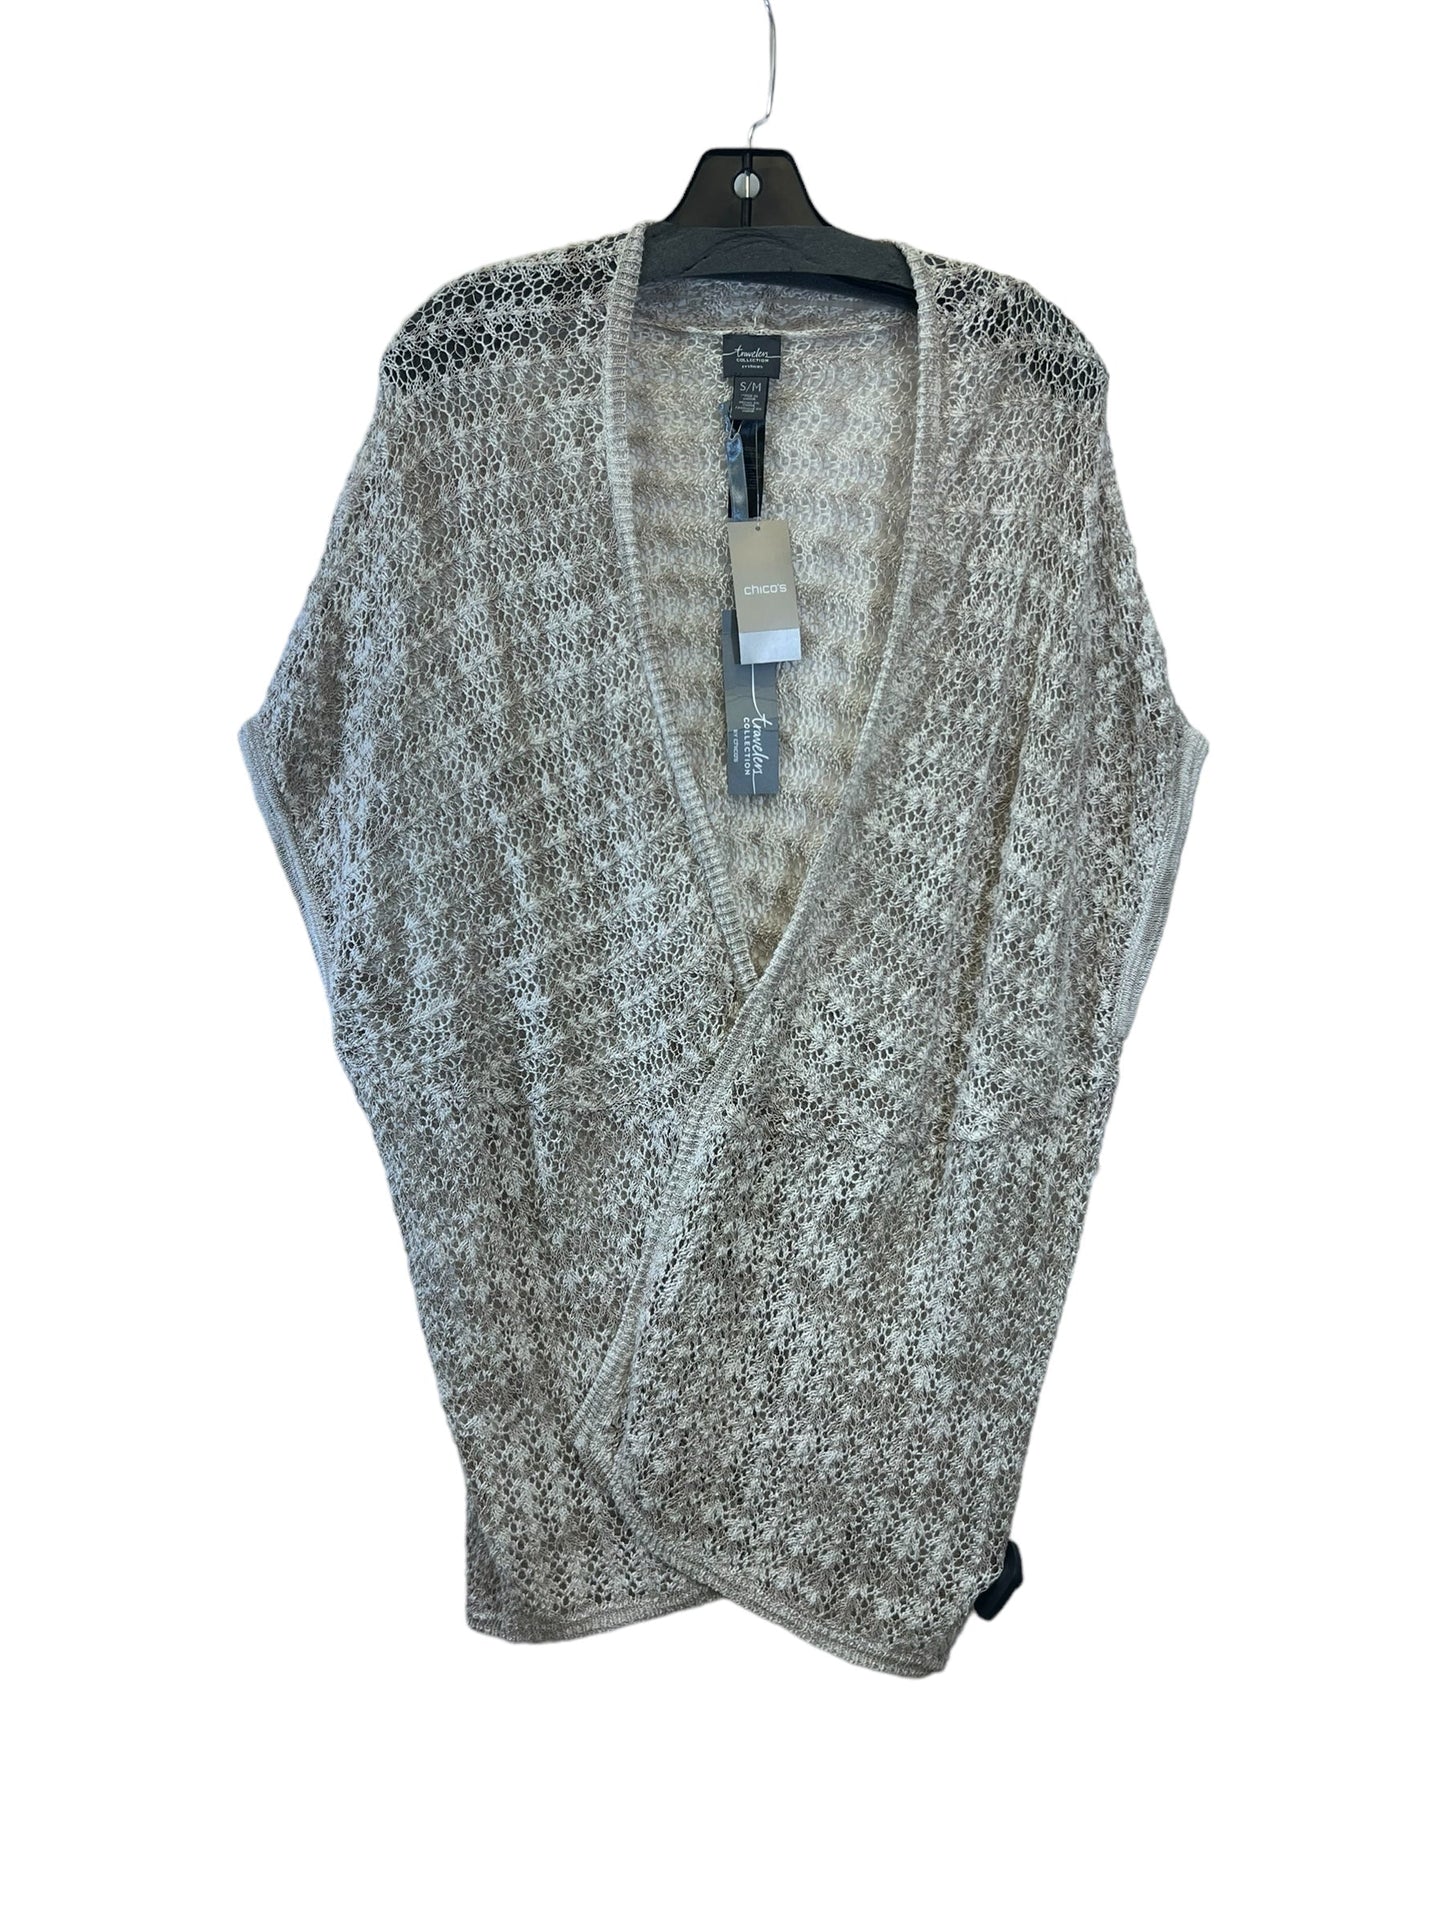 Cardigan By Chicos  Size: S